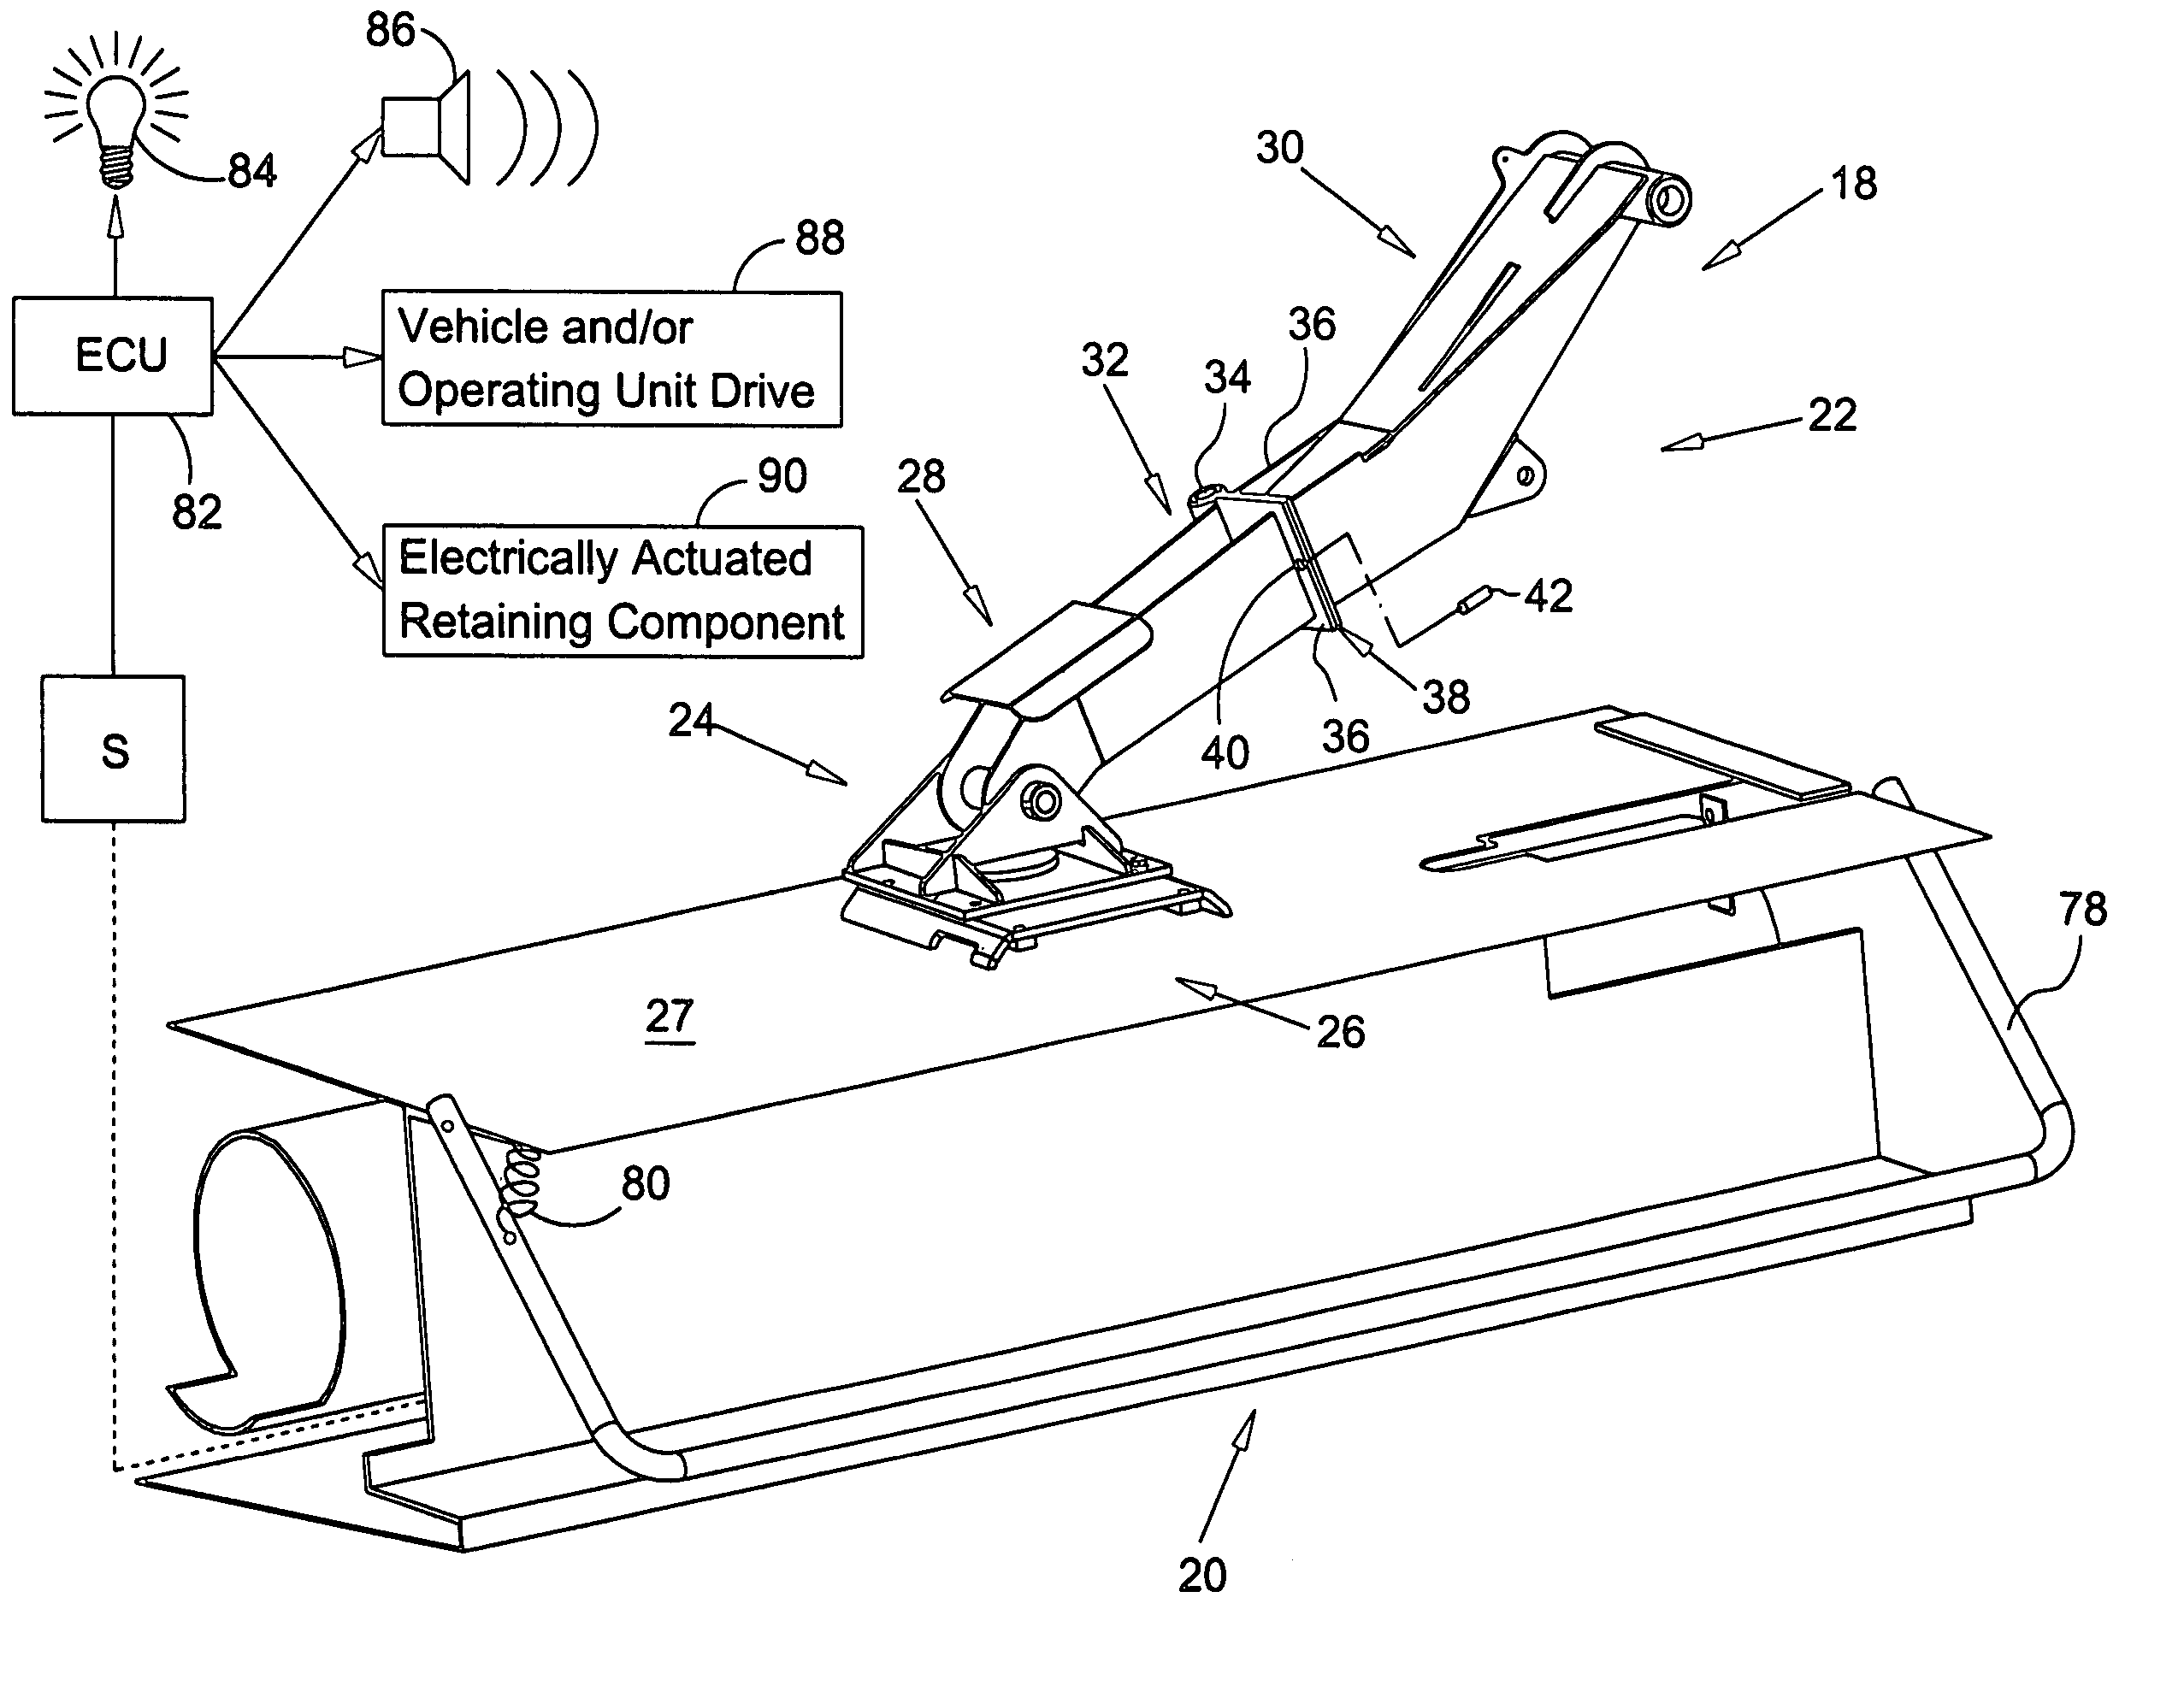 Retainer arrangement connecting operating unit to a vehicle